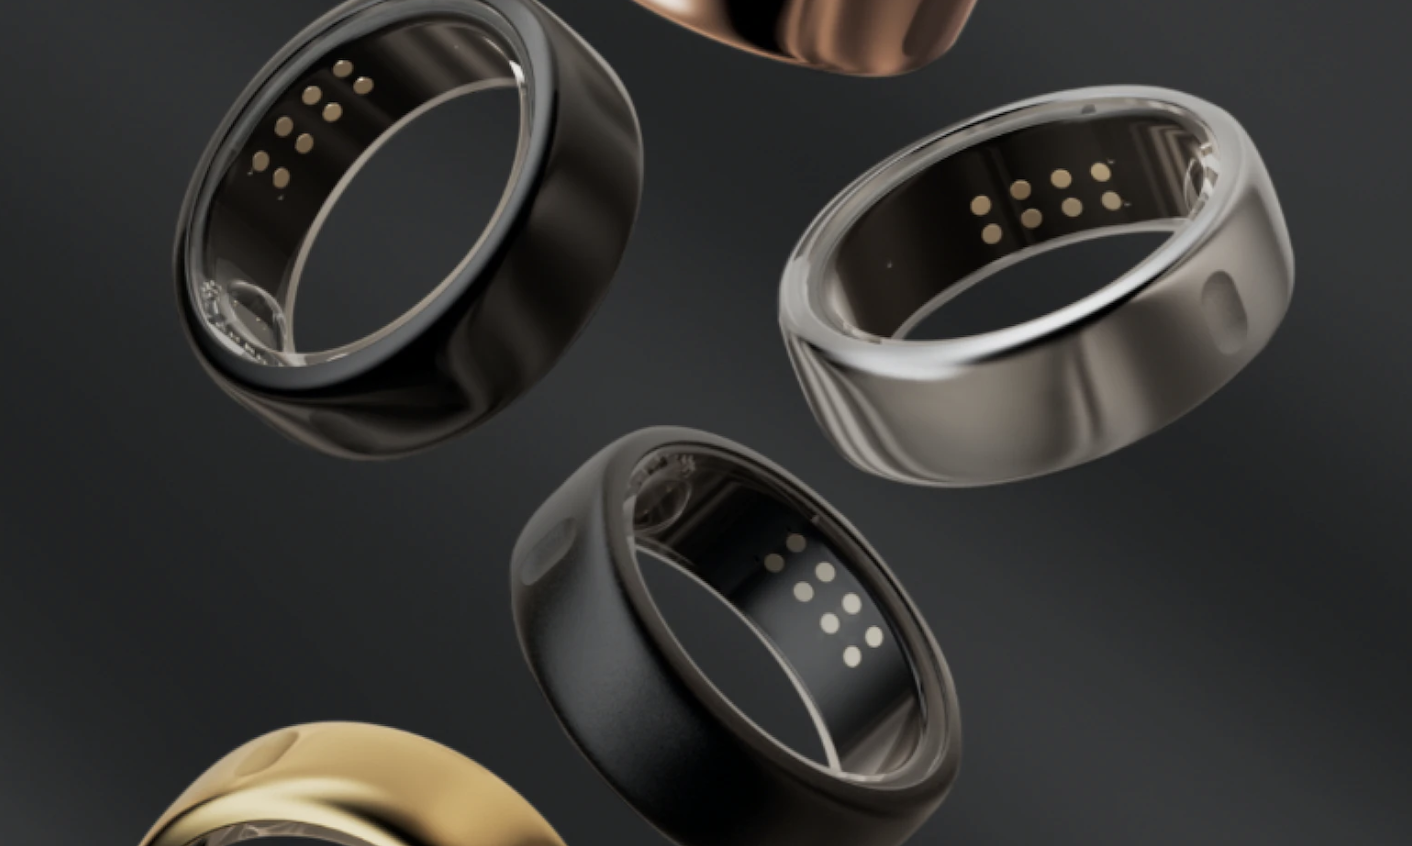 Oura sues Indian wearables startup Ultrahuman over patent infringement